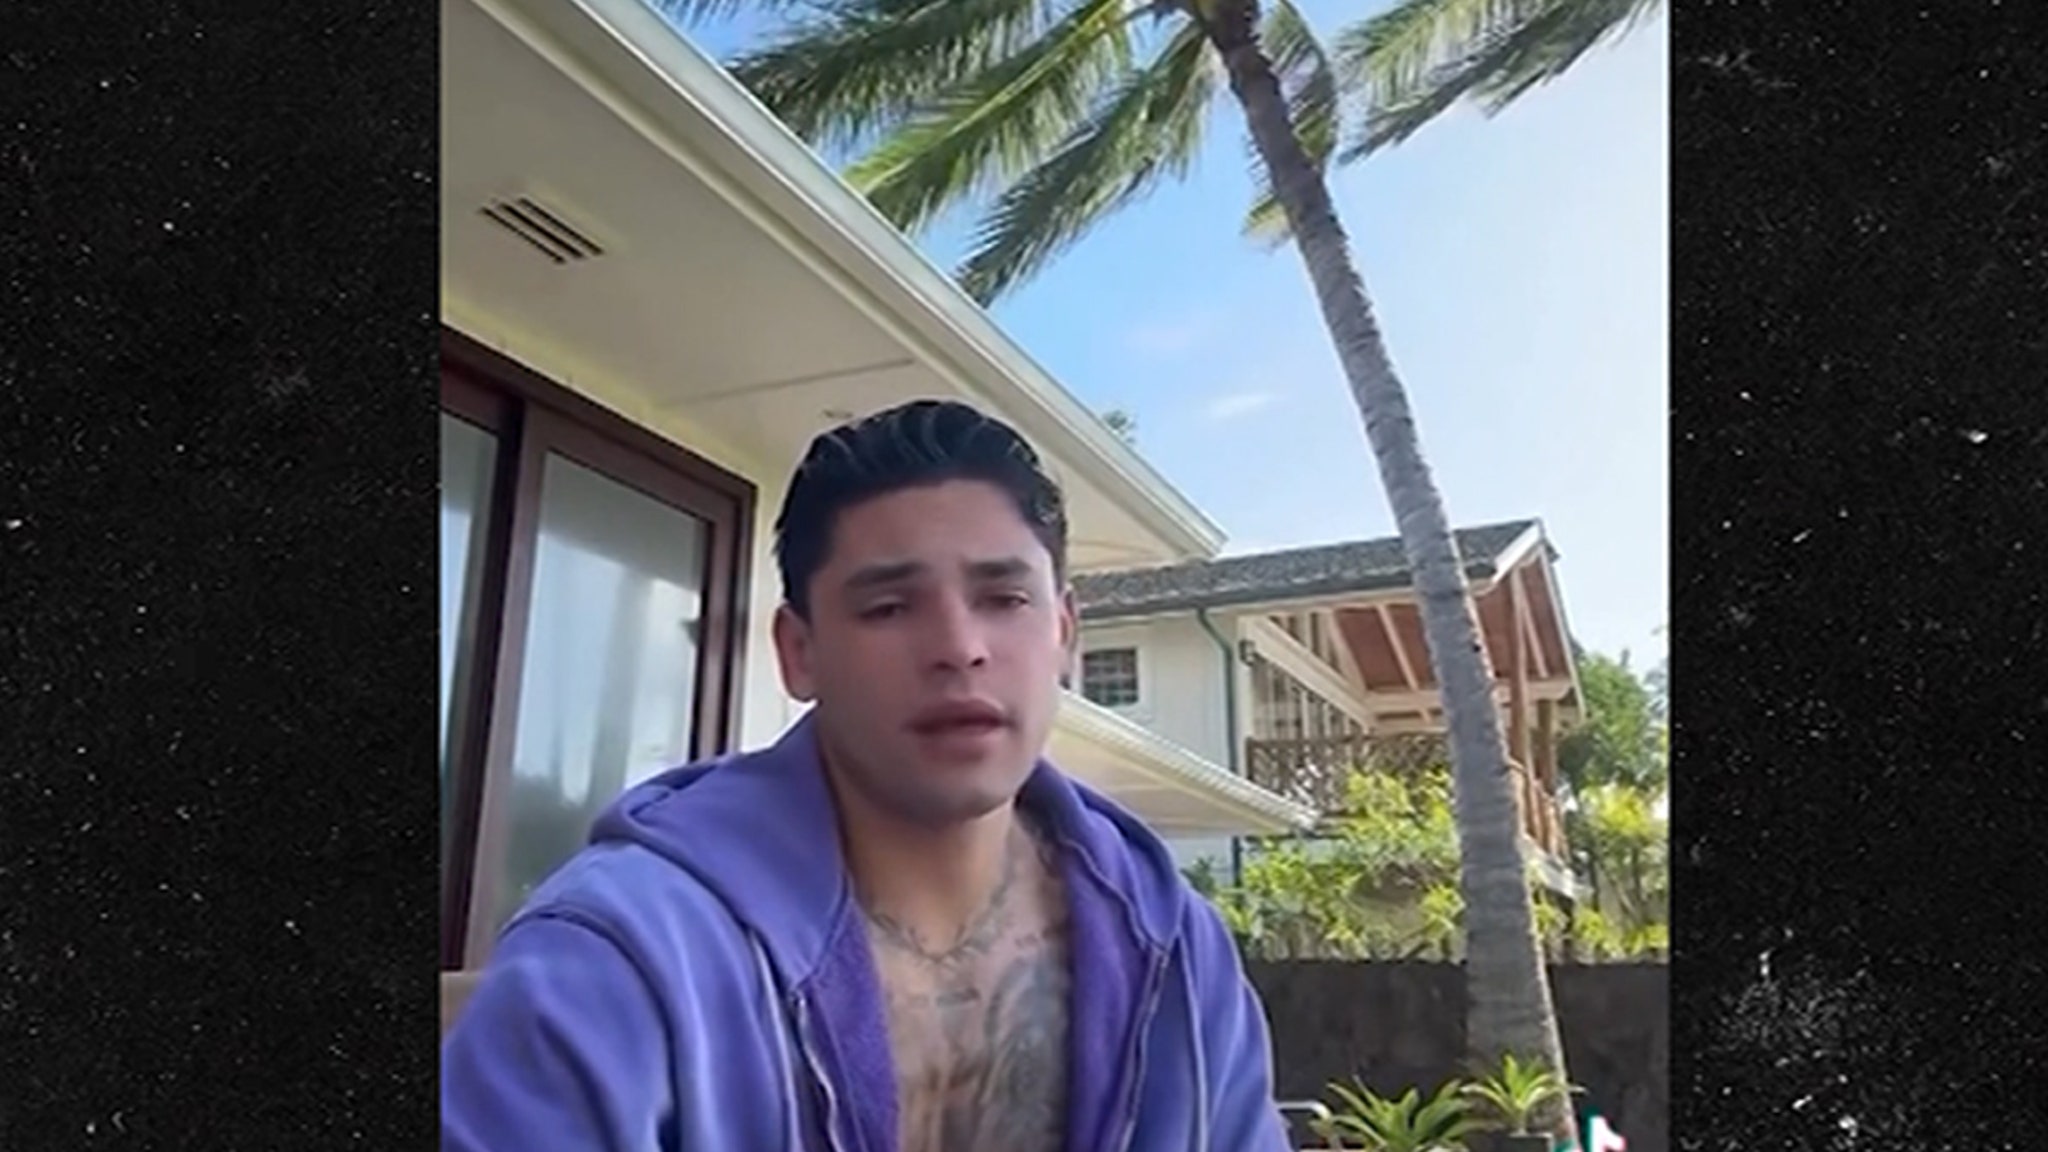 Ryan Garcia Says He's Going to Rehab In 2-Minute Apology Video to Ex-Wife